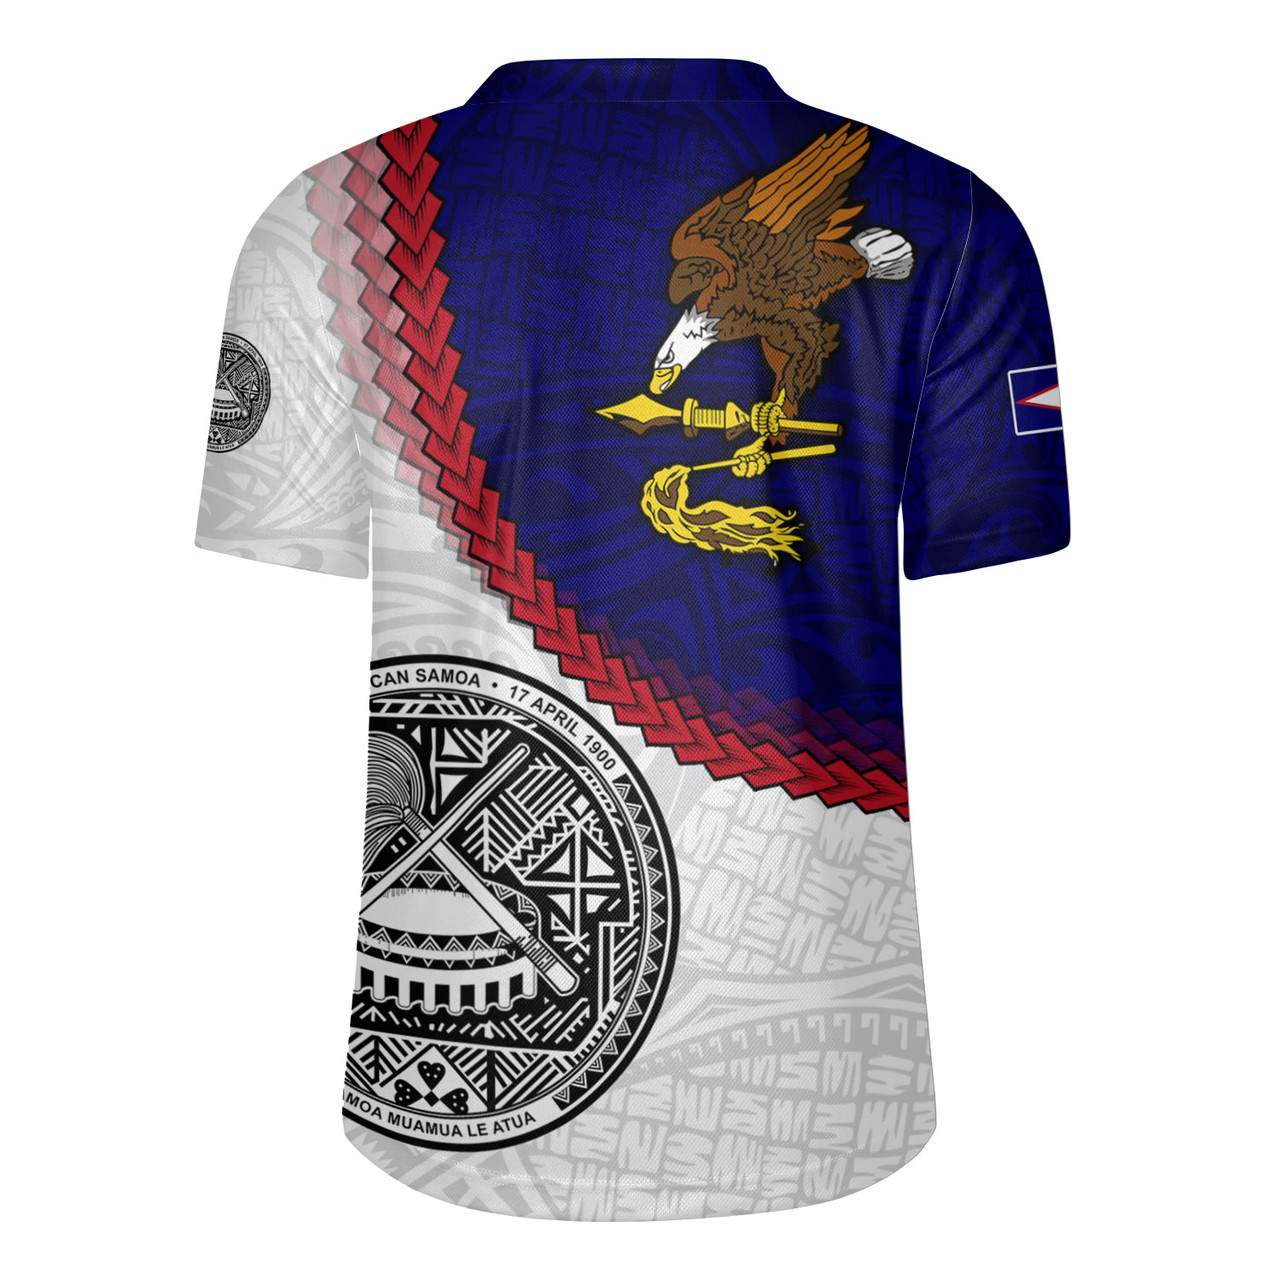 American Samoa Rugby Jersey Custom Polynesian Tradition Seal Flag Color